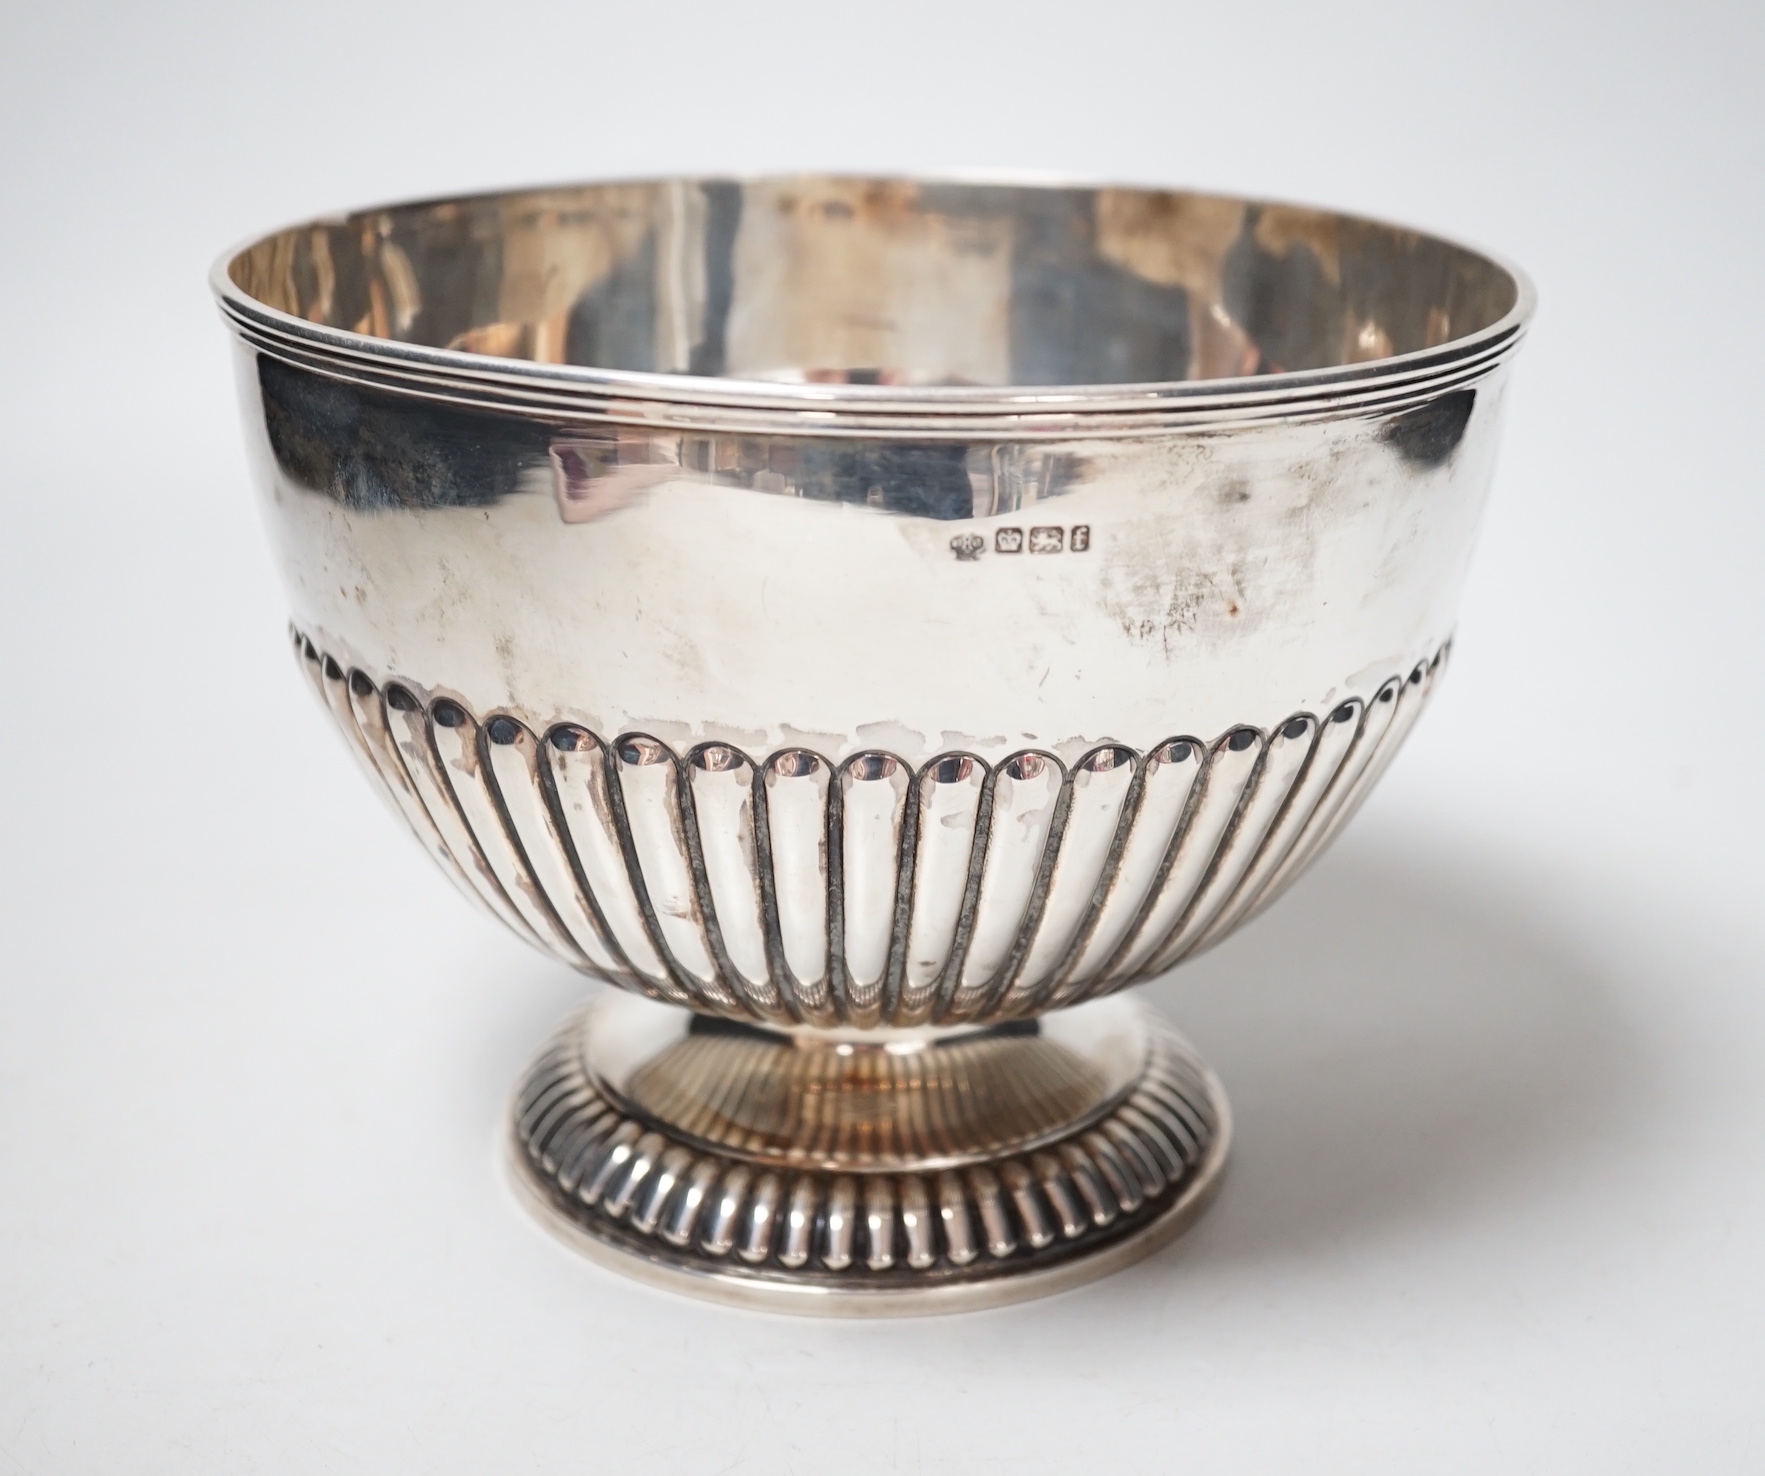 A late Victorian demi-fluted rose bowl, by William Hutton & Sons, Sheffield, 1898, diameter 18.5cm, 14.6oz.